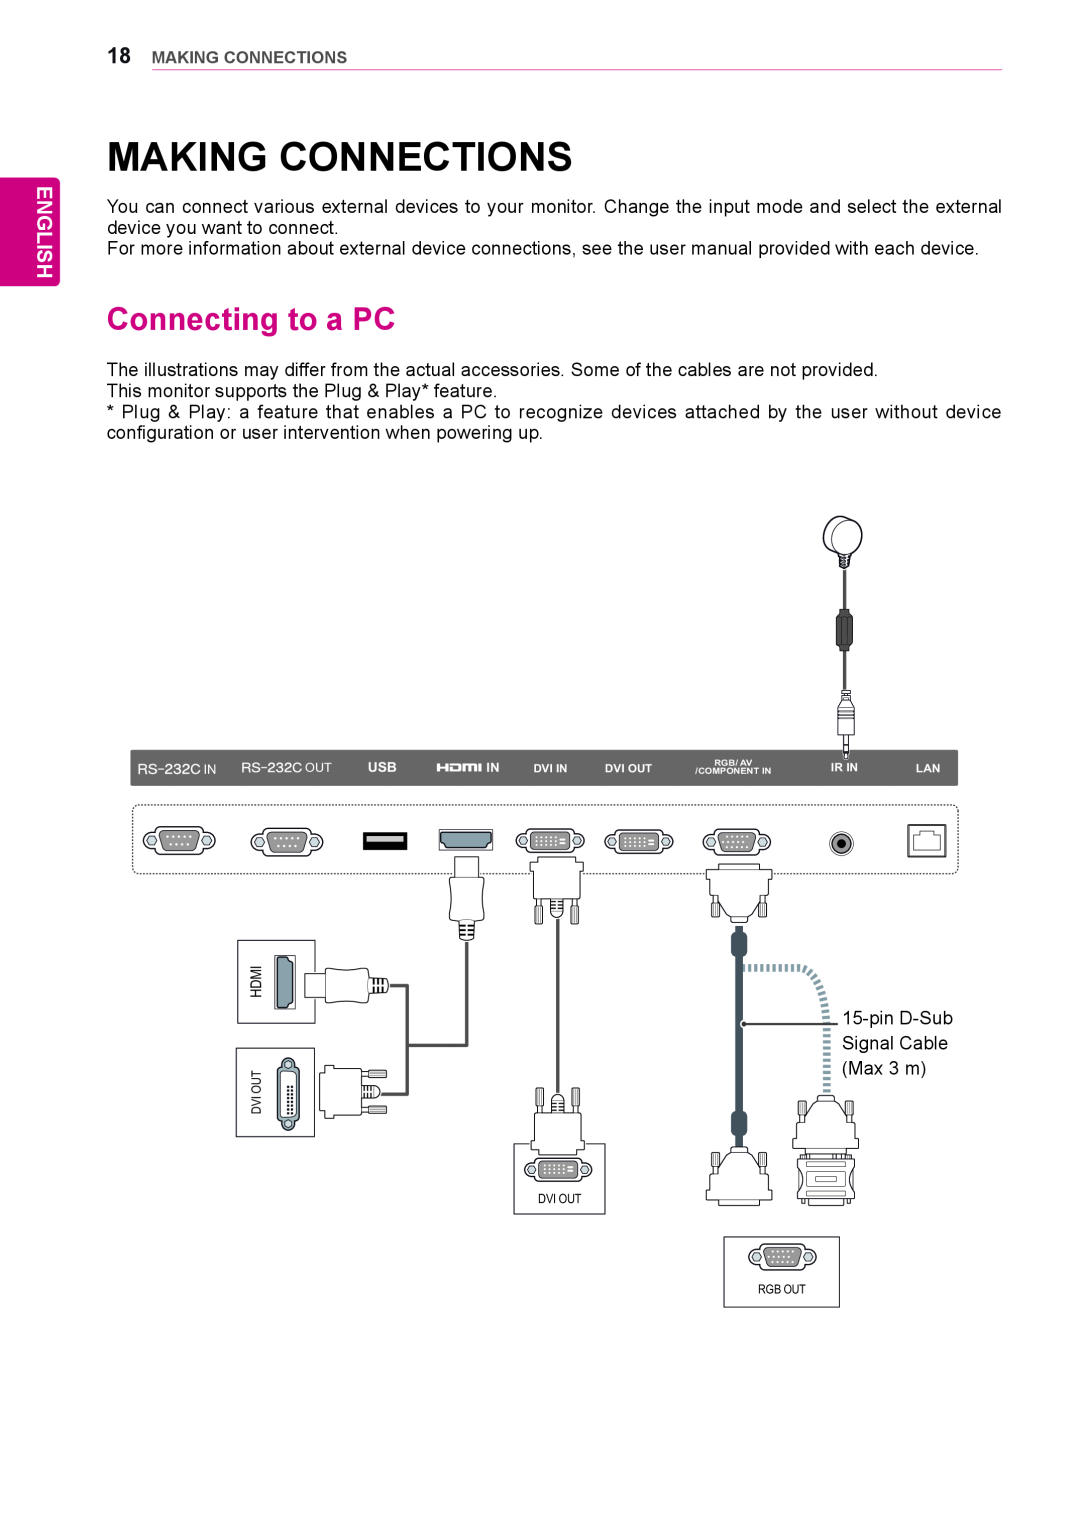 LG Electronics 47LV35A, 55LV35A owner manual Making Connections, Connecting to a PC, English 